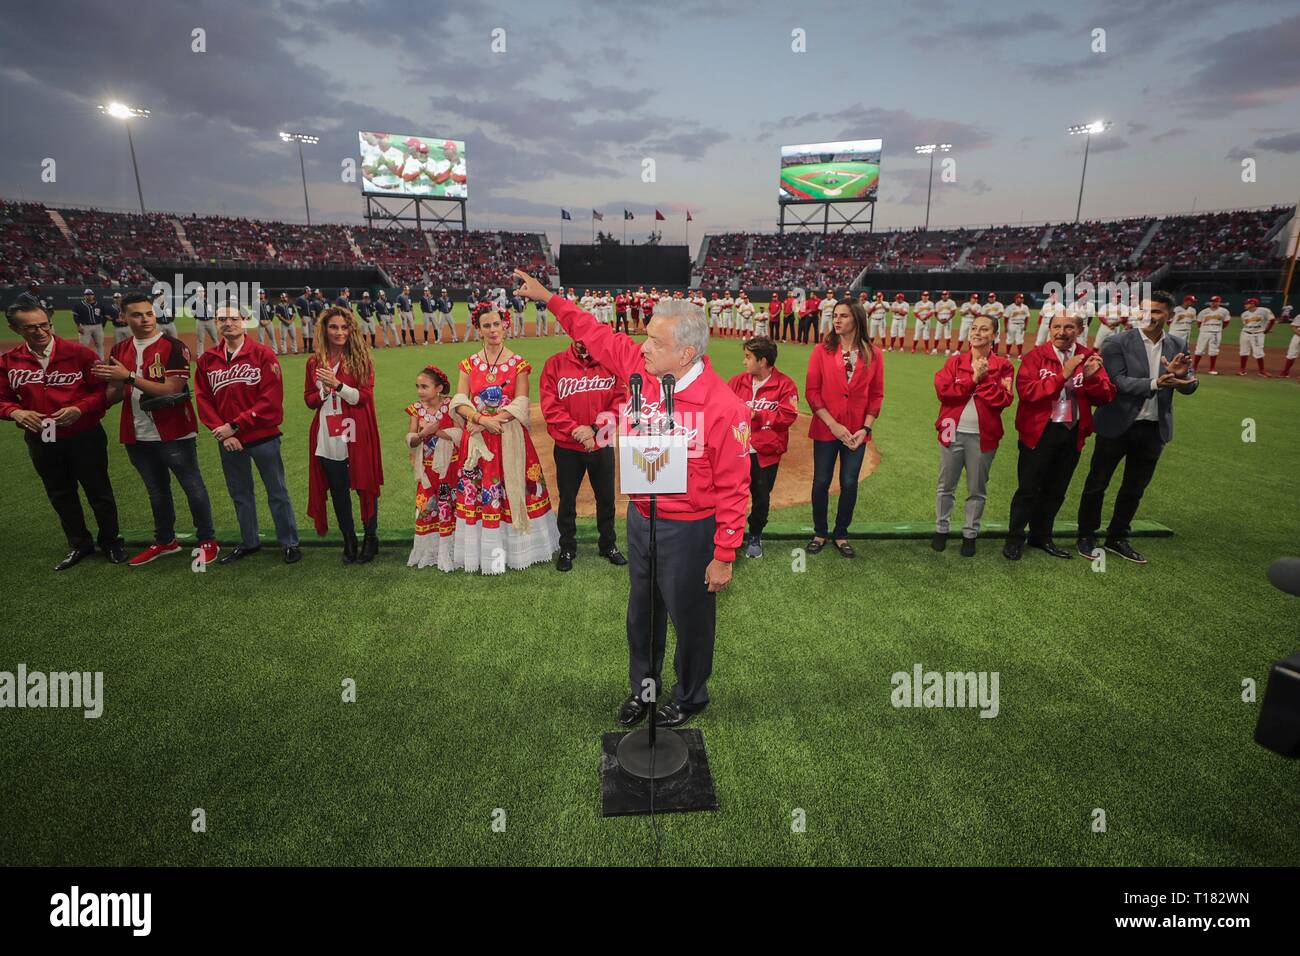 Mexico City, Mexico. 23rd Mar, 2019. Mexican President Andres Manuel Lopez Obrador during the opening ceremony at the Alfredo Harp Helu Baseball Stadium, home of the Mexico City Red Devils March 23, 2019 in Mexico City, Mexico. Obrador who has enjoyed soaring approval ratings was booed and jeered by the hostile crowd in a rare display of public animosity for the popular president. Credit: Planetpix/Alamy Live News Stock Photo